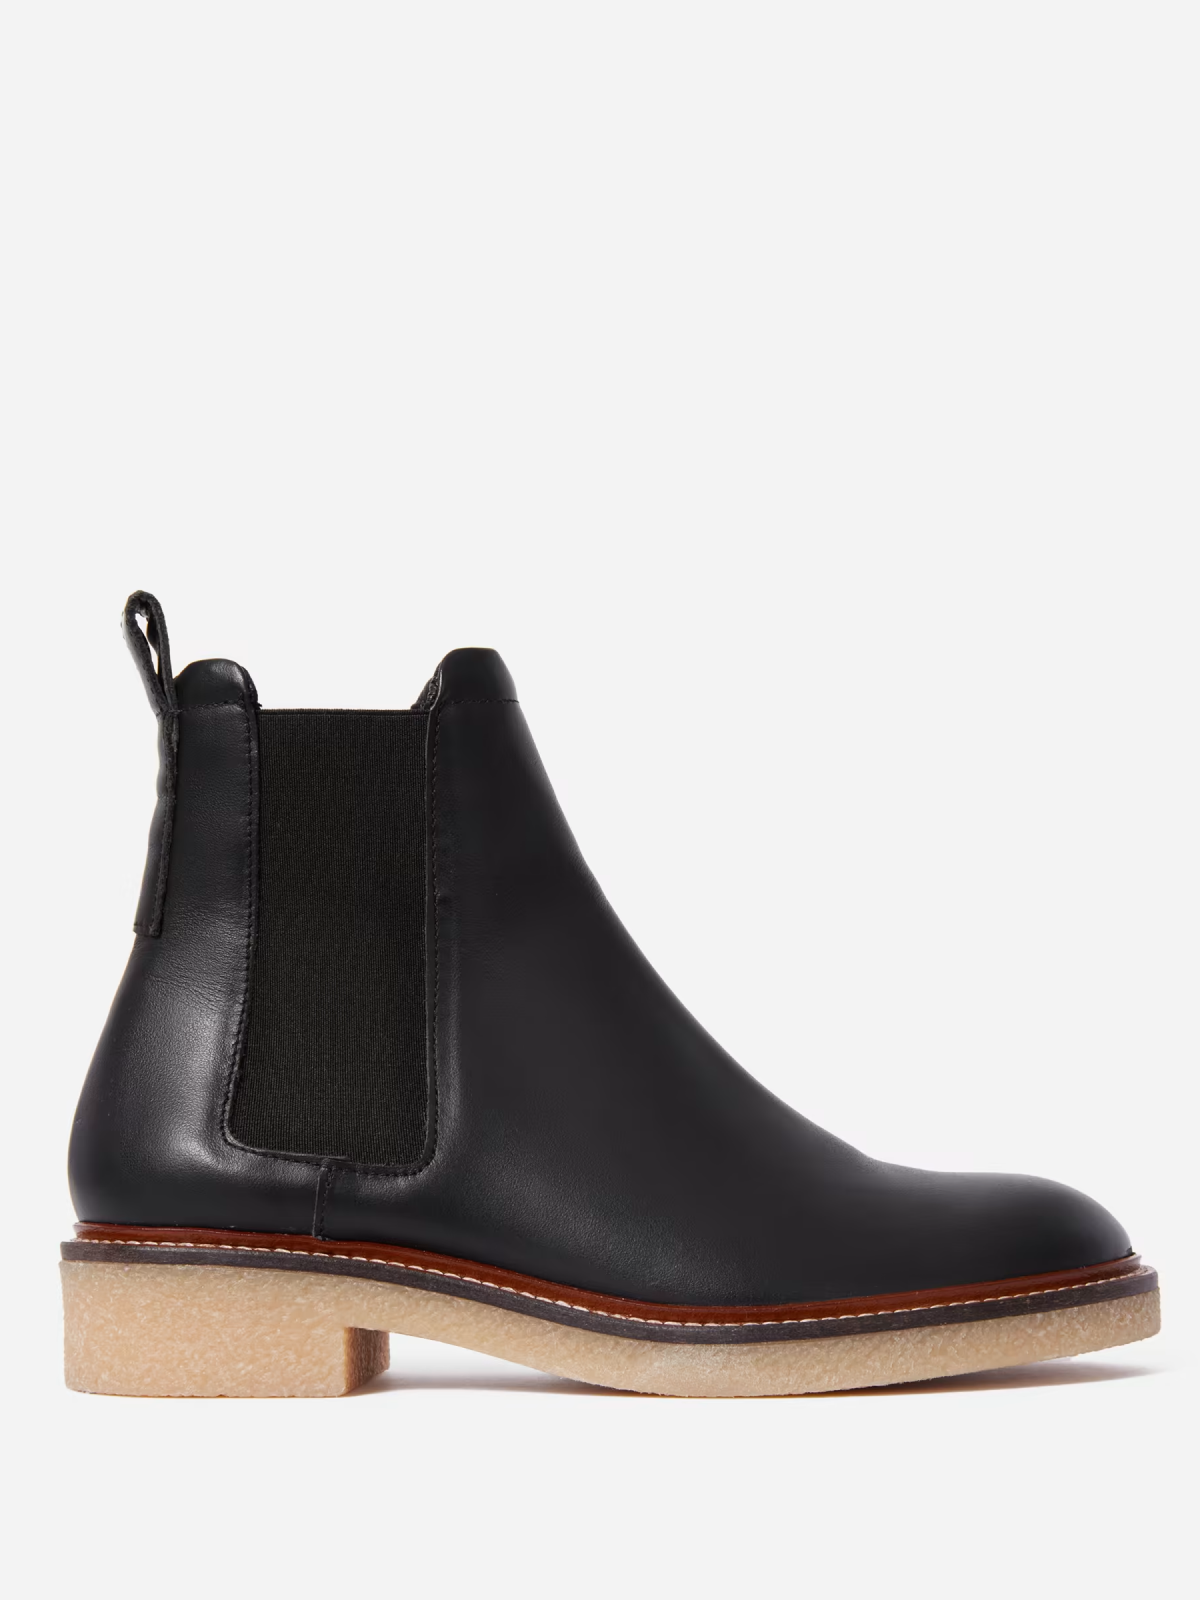 The Chelsea Boot